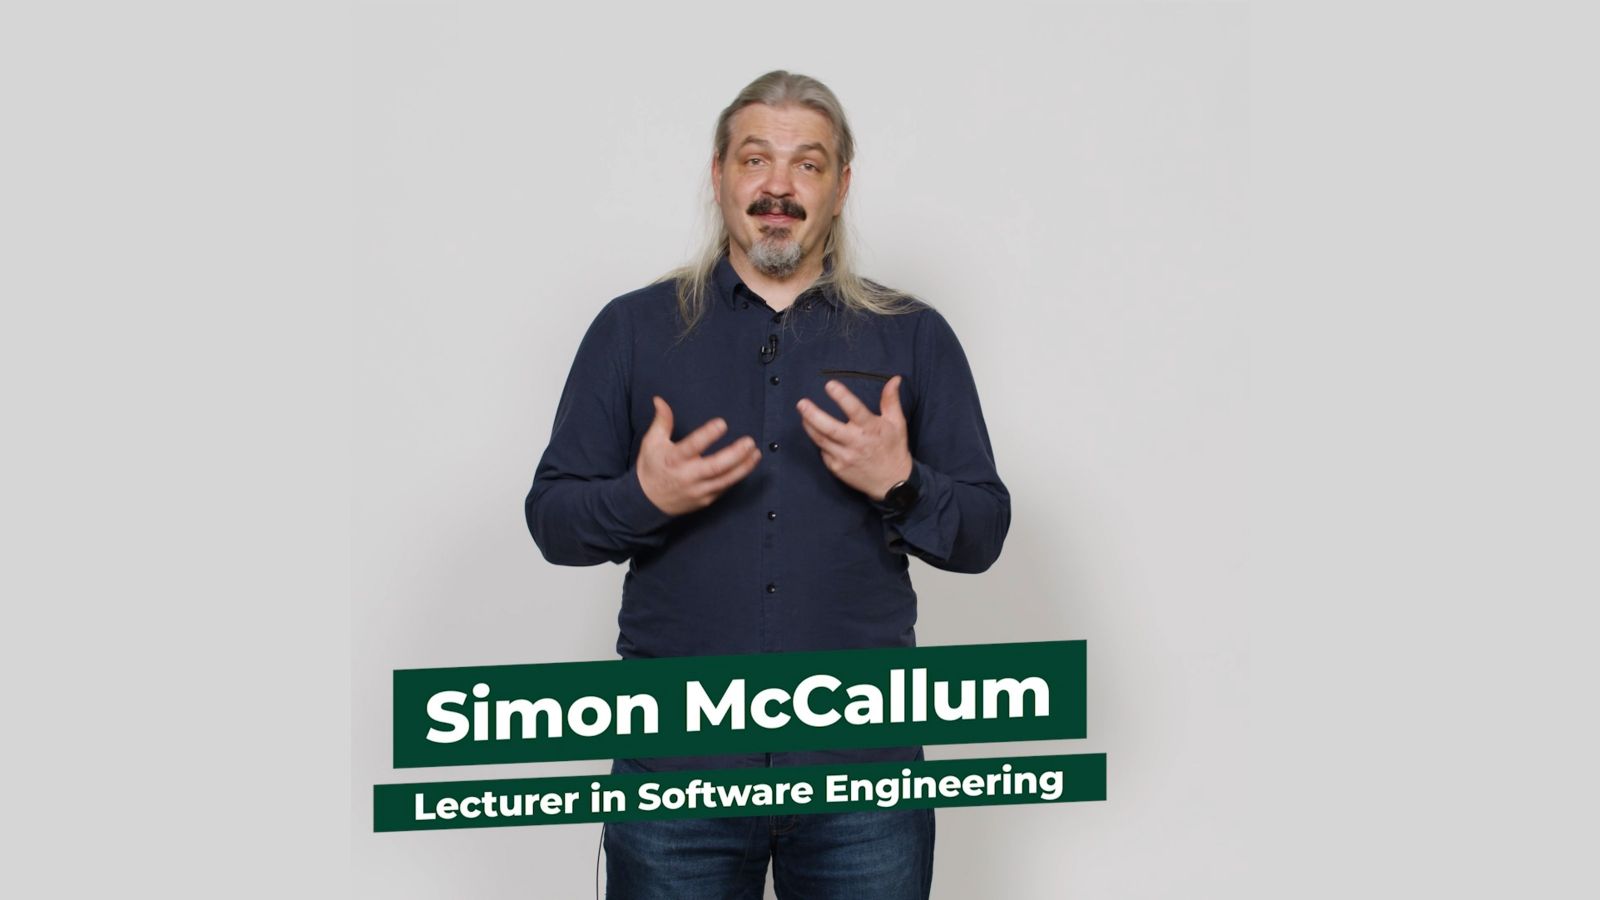 Software Engineering lecturer Simon McCallum stands facing the camera against a white backdrop.